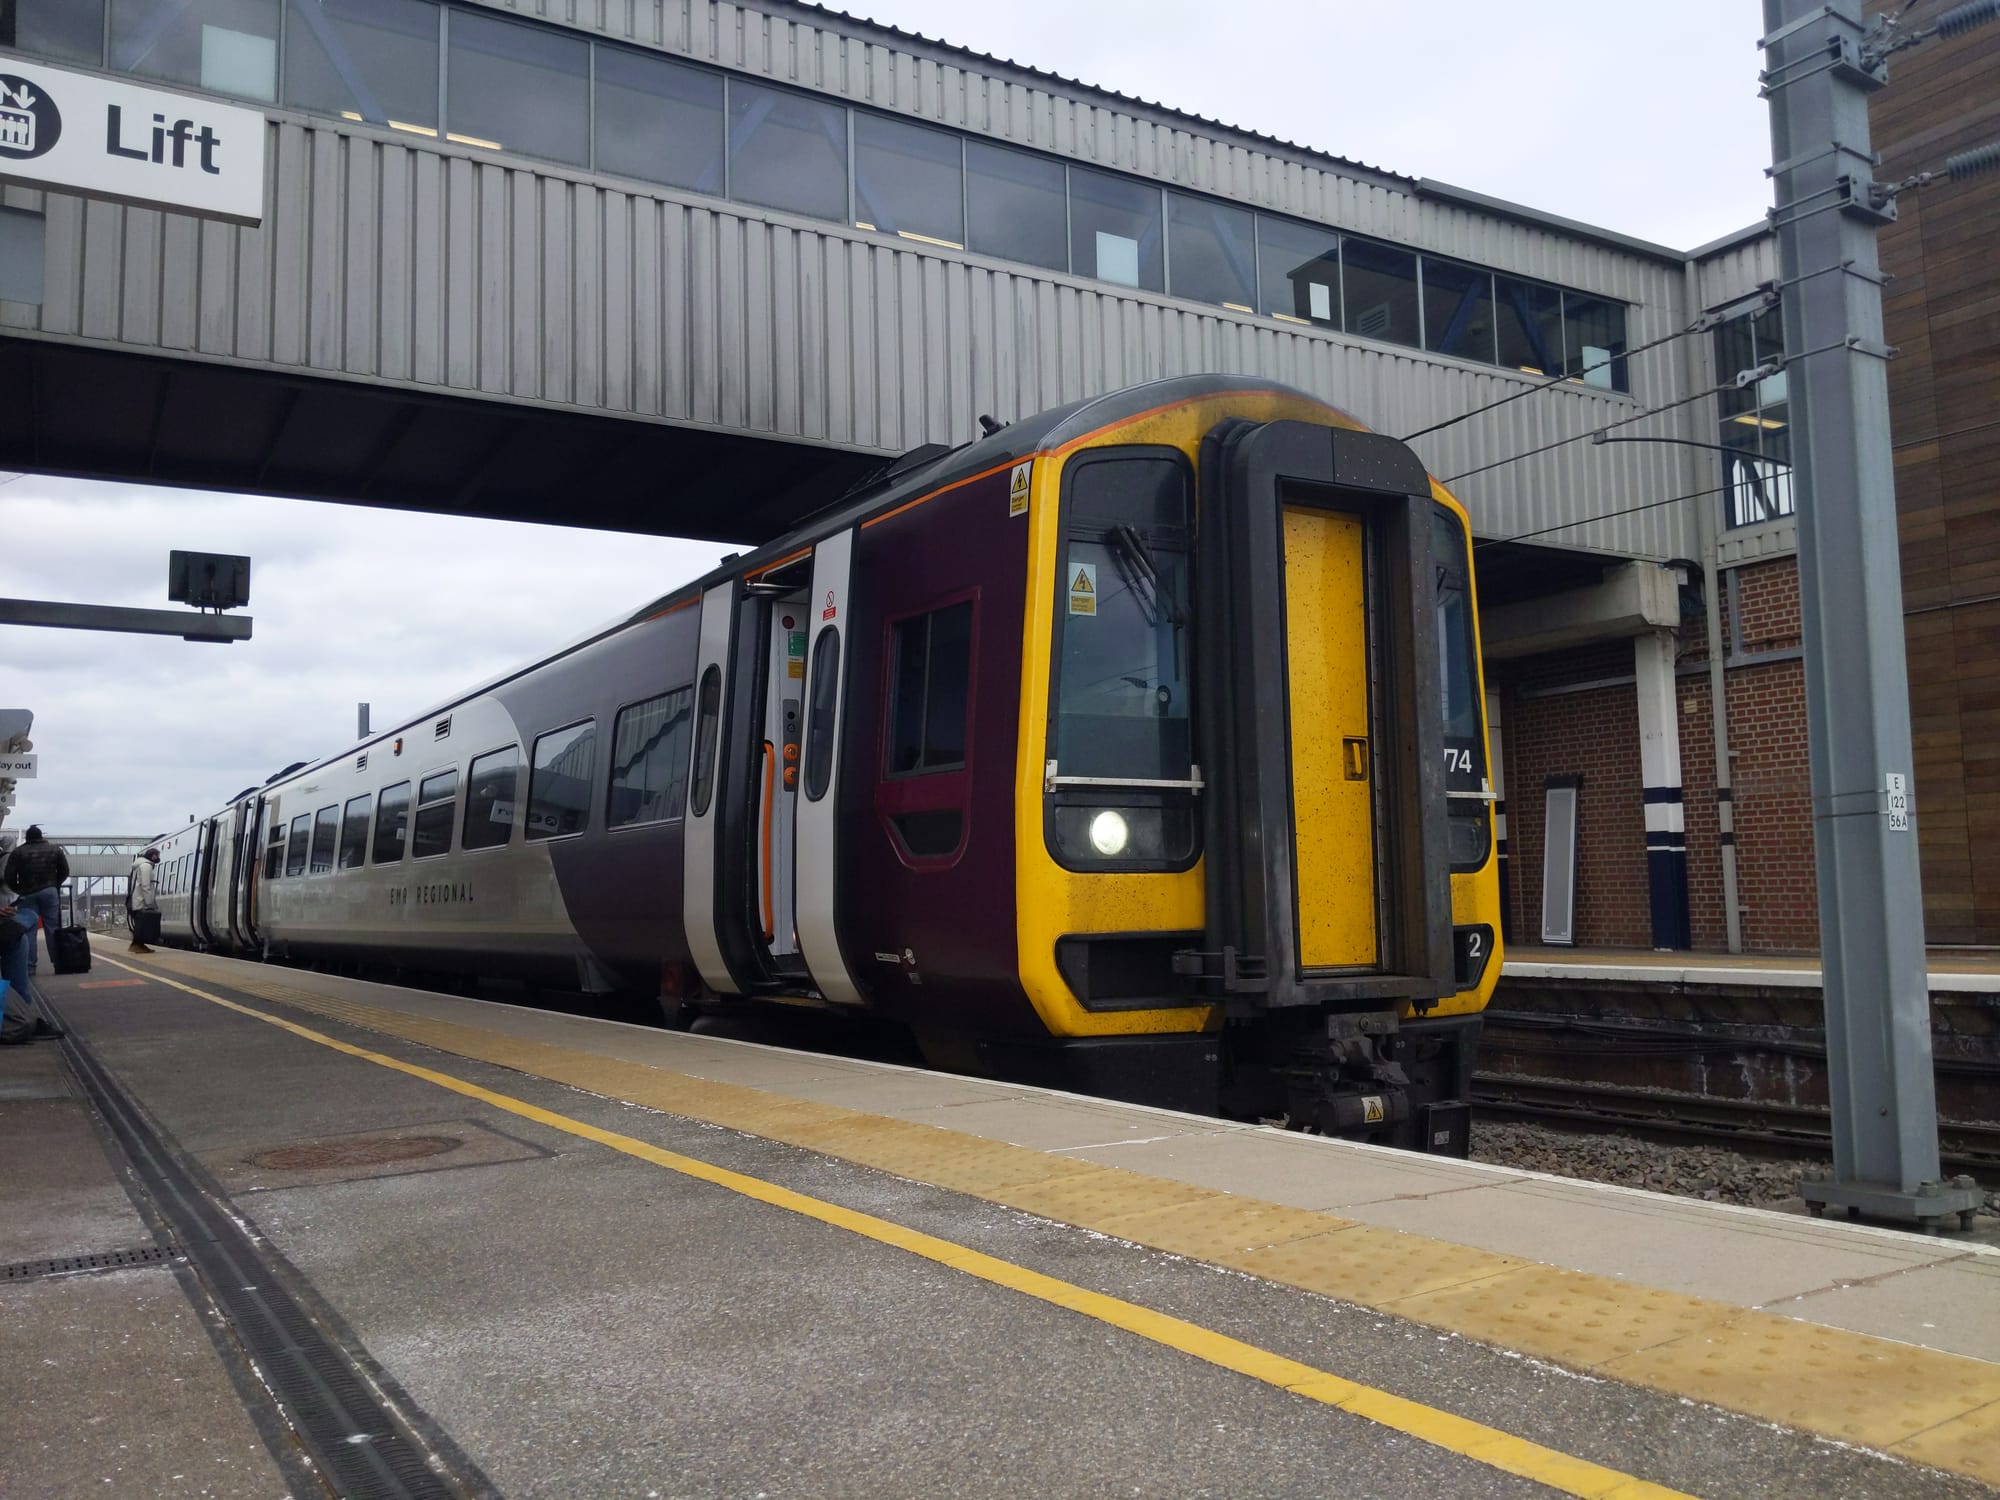 A Class 158 train is stationary at a station. The front of the train is painted vivid yellow and has two windows on either side separated by a protruding cab door. The livery is purple at the front. The doors are open and are white. The train is below a grey footbridge.